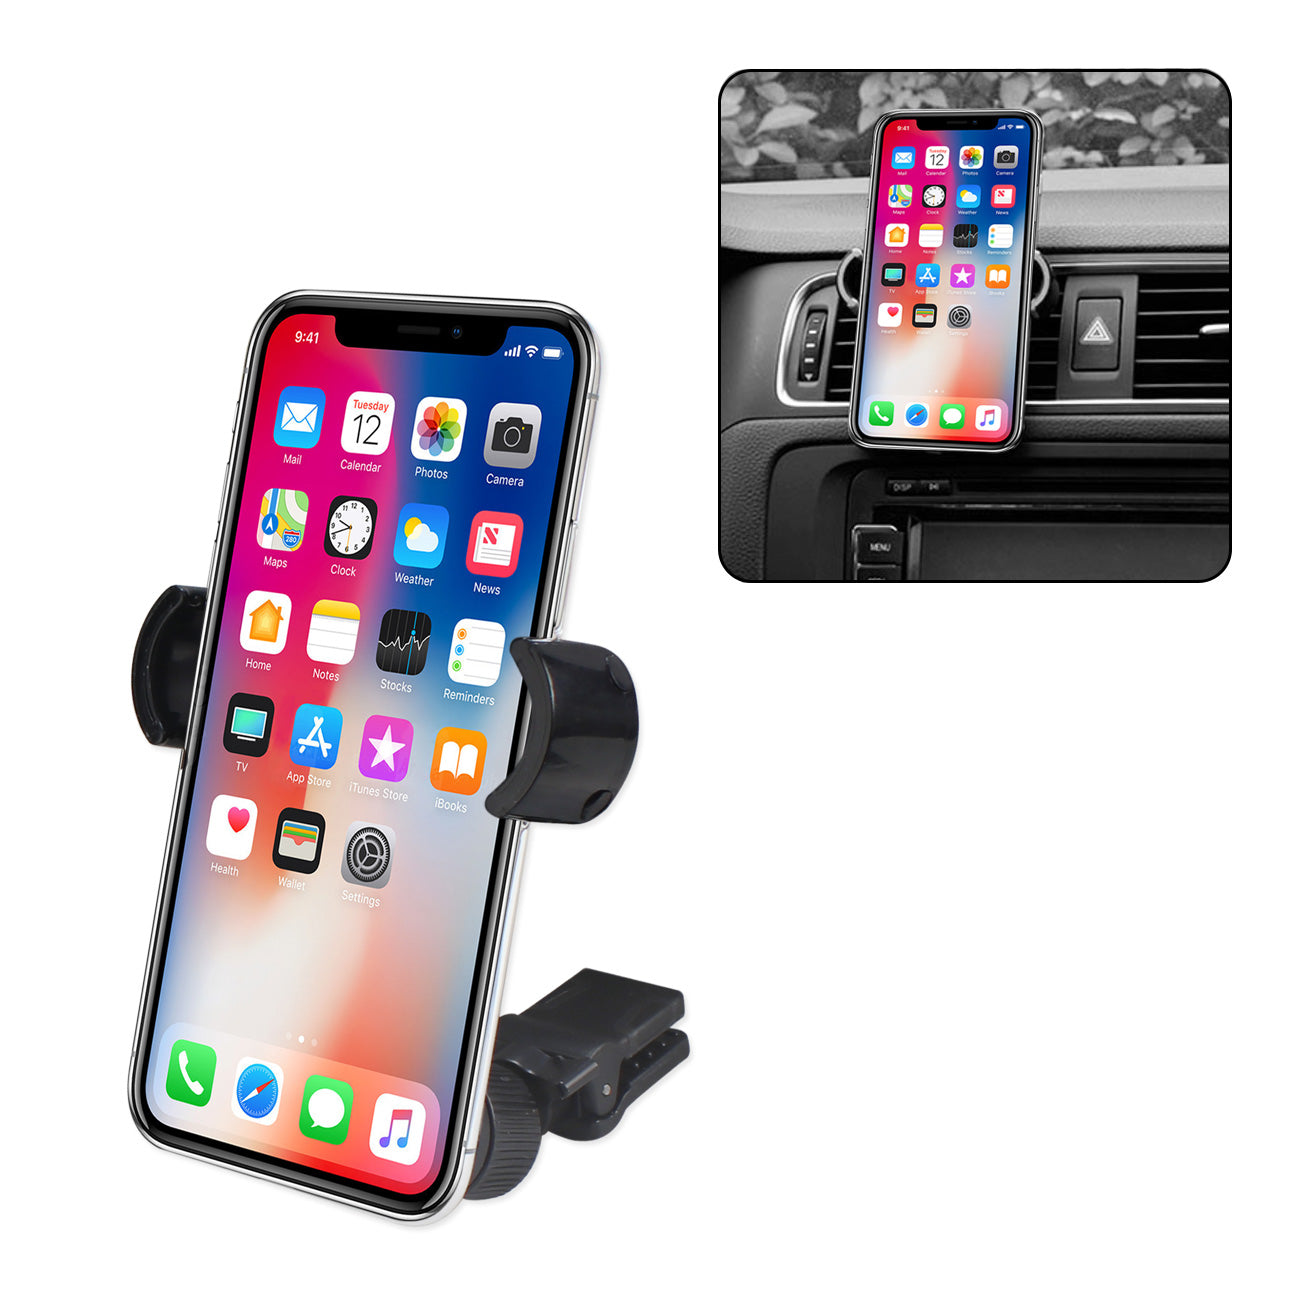 Reiko Universal Cell Phone Air Vent Car Mount Holder Cradle In Black